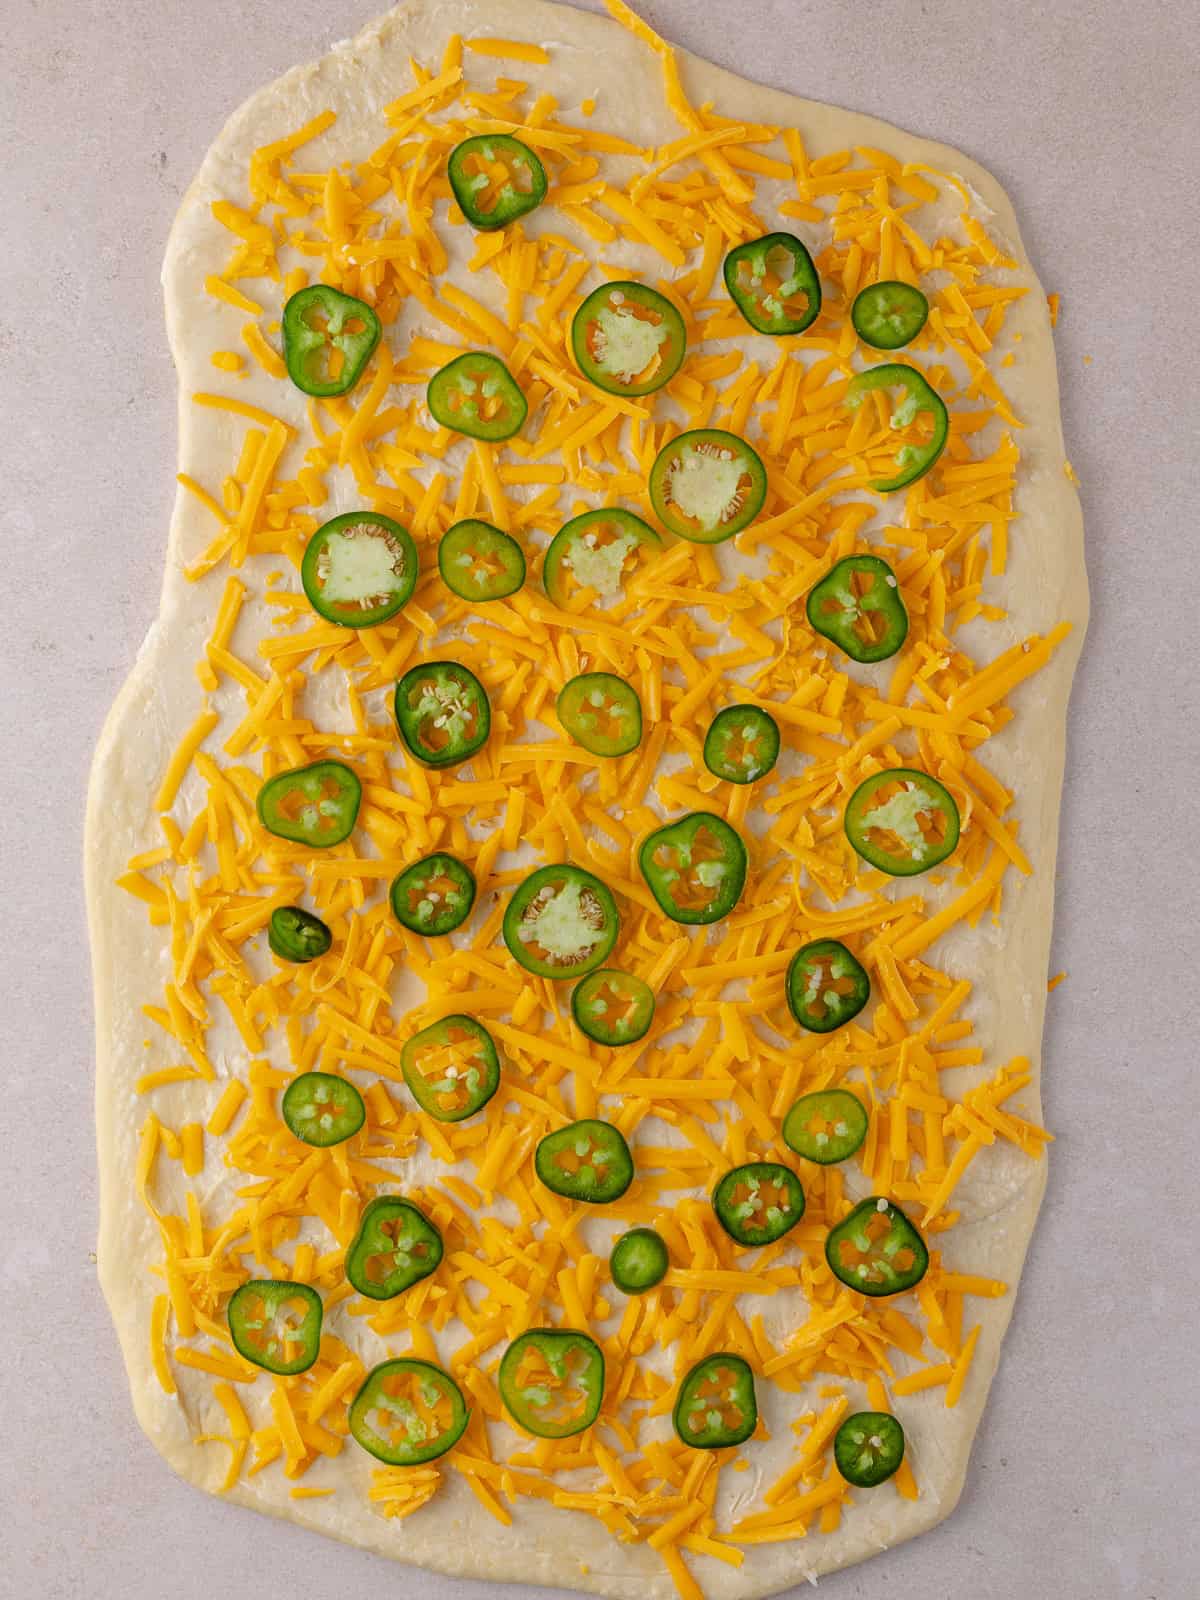 Shredded cheddar cheese and jalapenos are added on top of garlic butter layer.